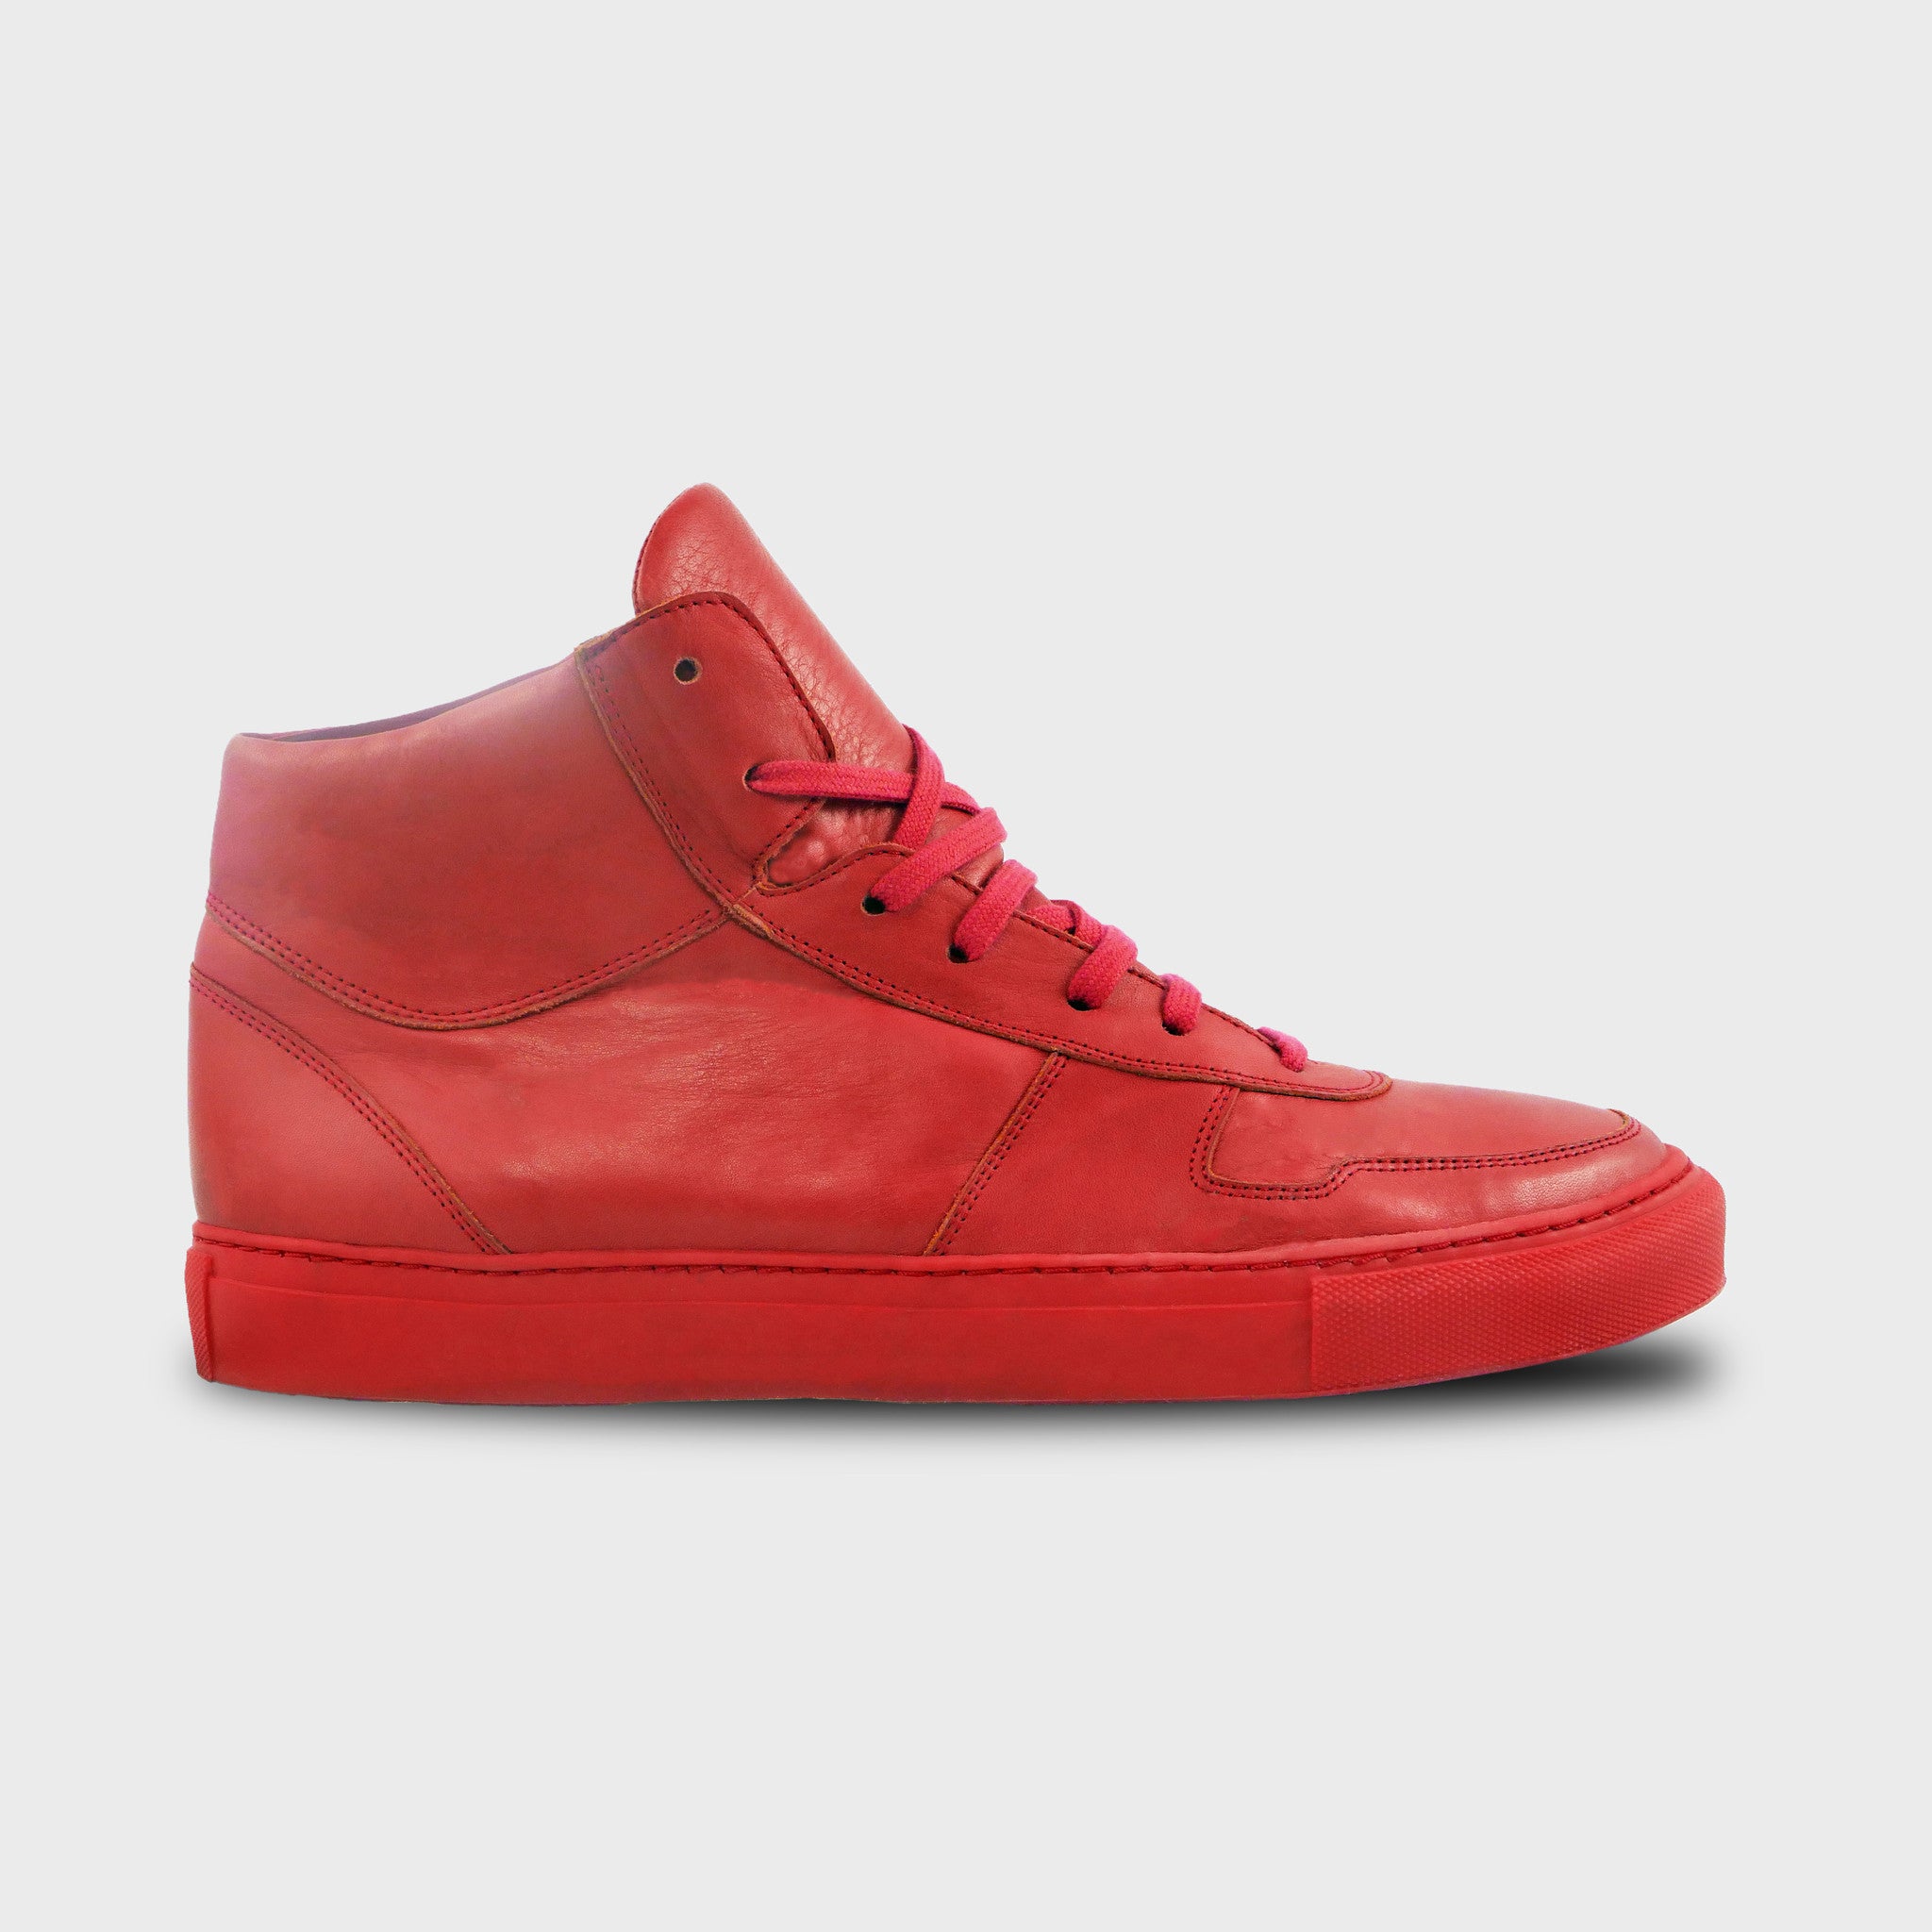 Black Phoenix High Top In All Red